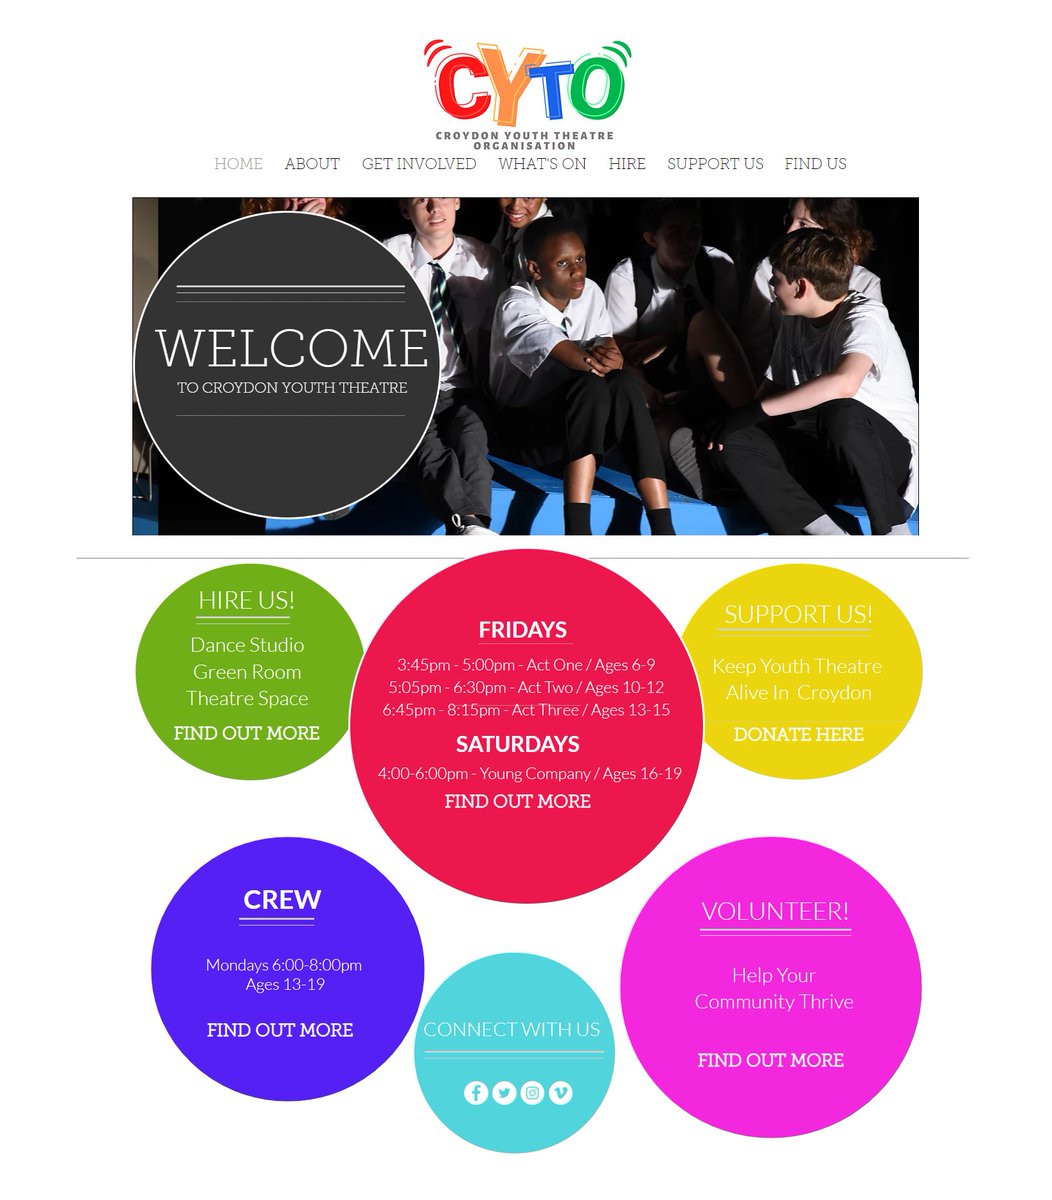 CYTO is a local Youth Theatre in #SE25 with courses and theatre shows for children and young people. cyto.org.uk
#Croydon #Young #Theatre #Norwood #SE25 #SouthNorwood #youngtheatre